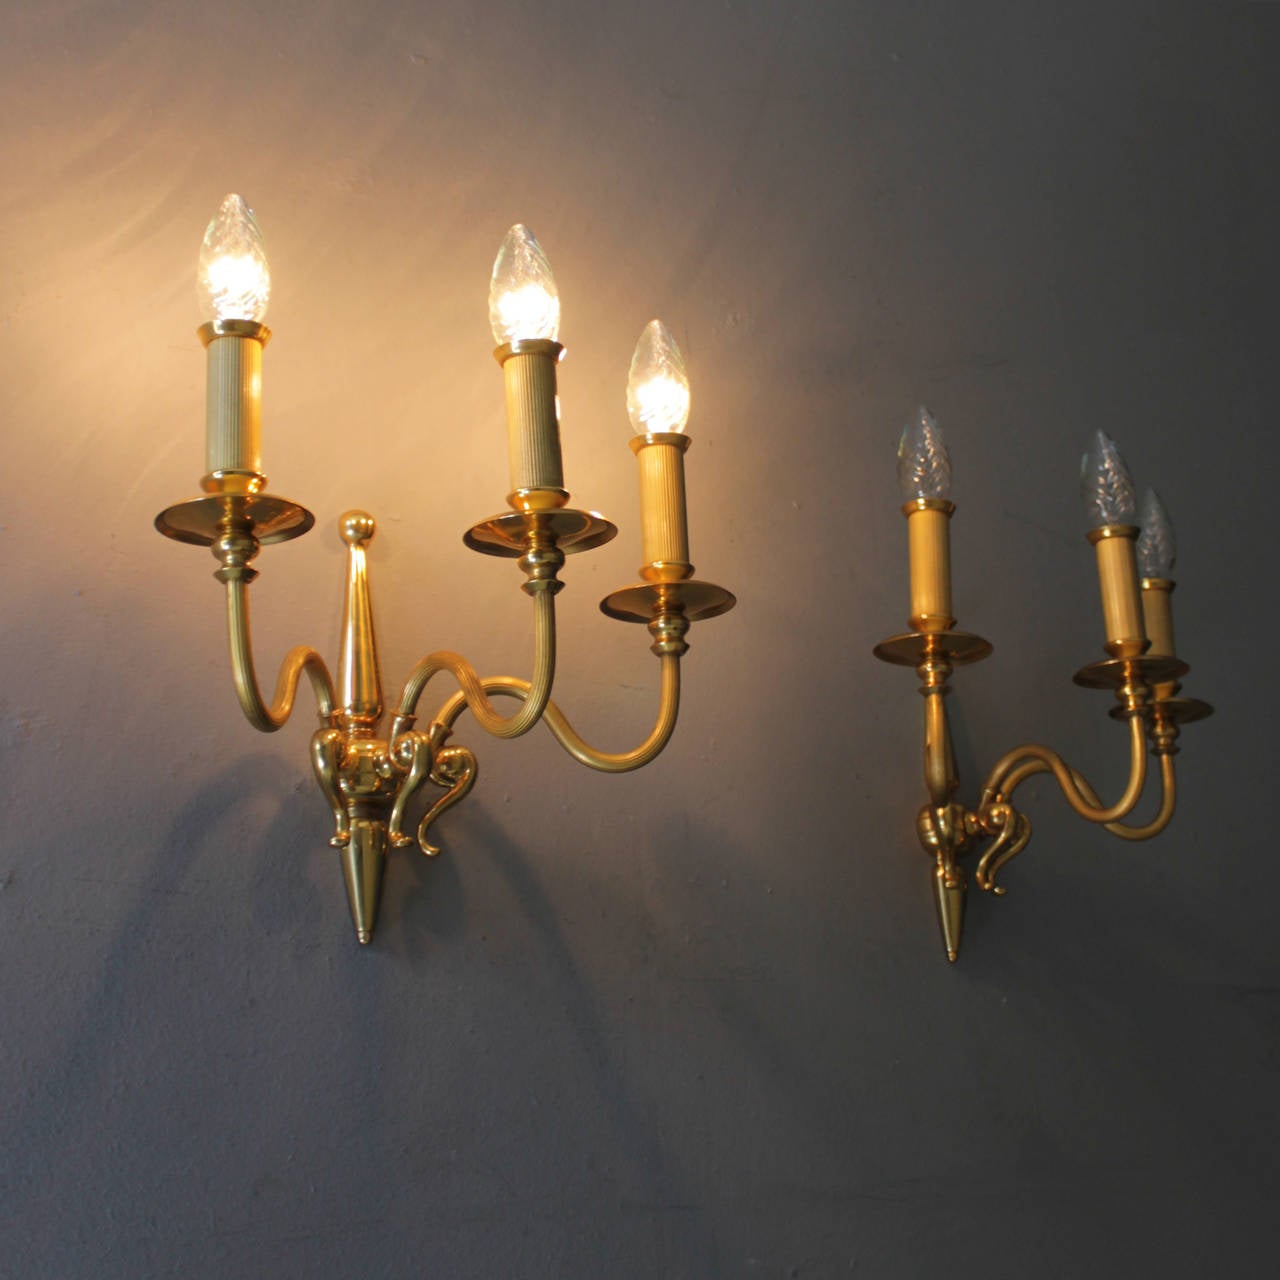 Pair of Signed Lumi Milano Gold-Plated Sconces For Sale 2